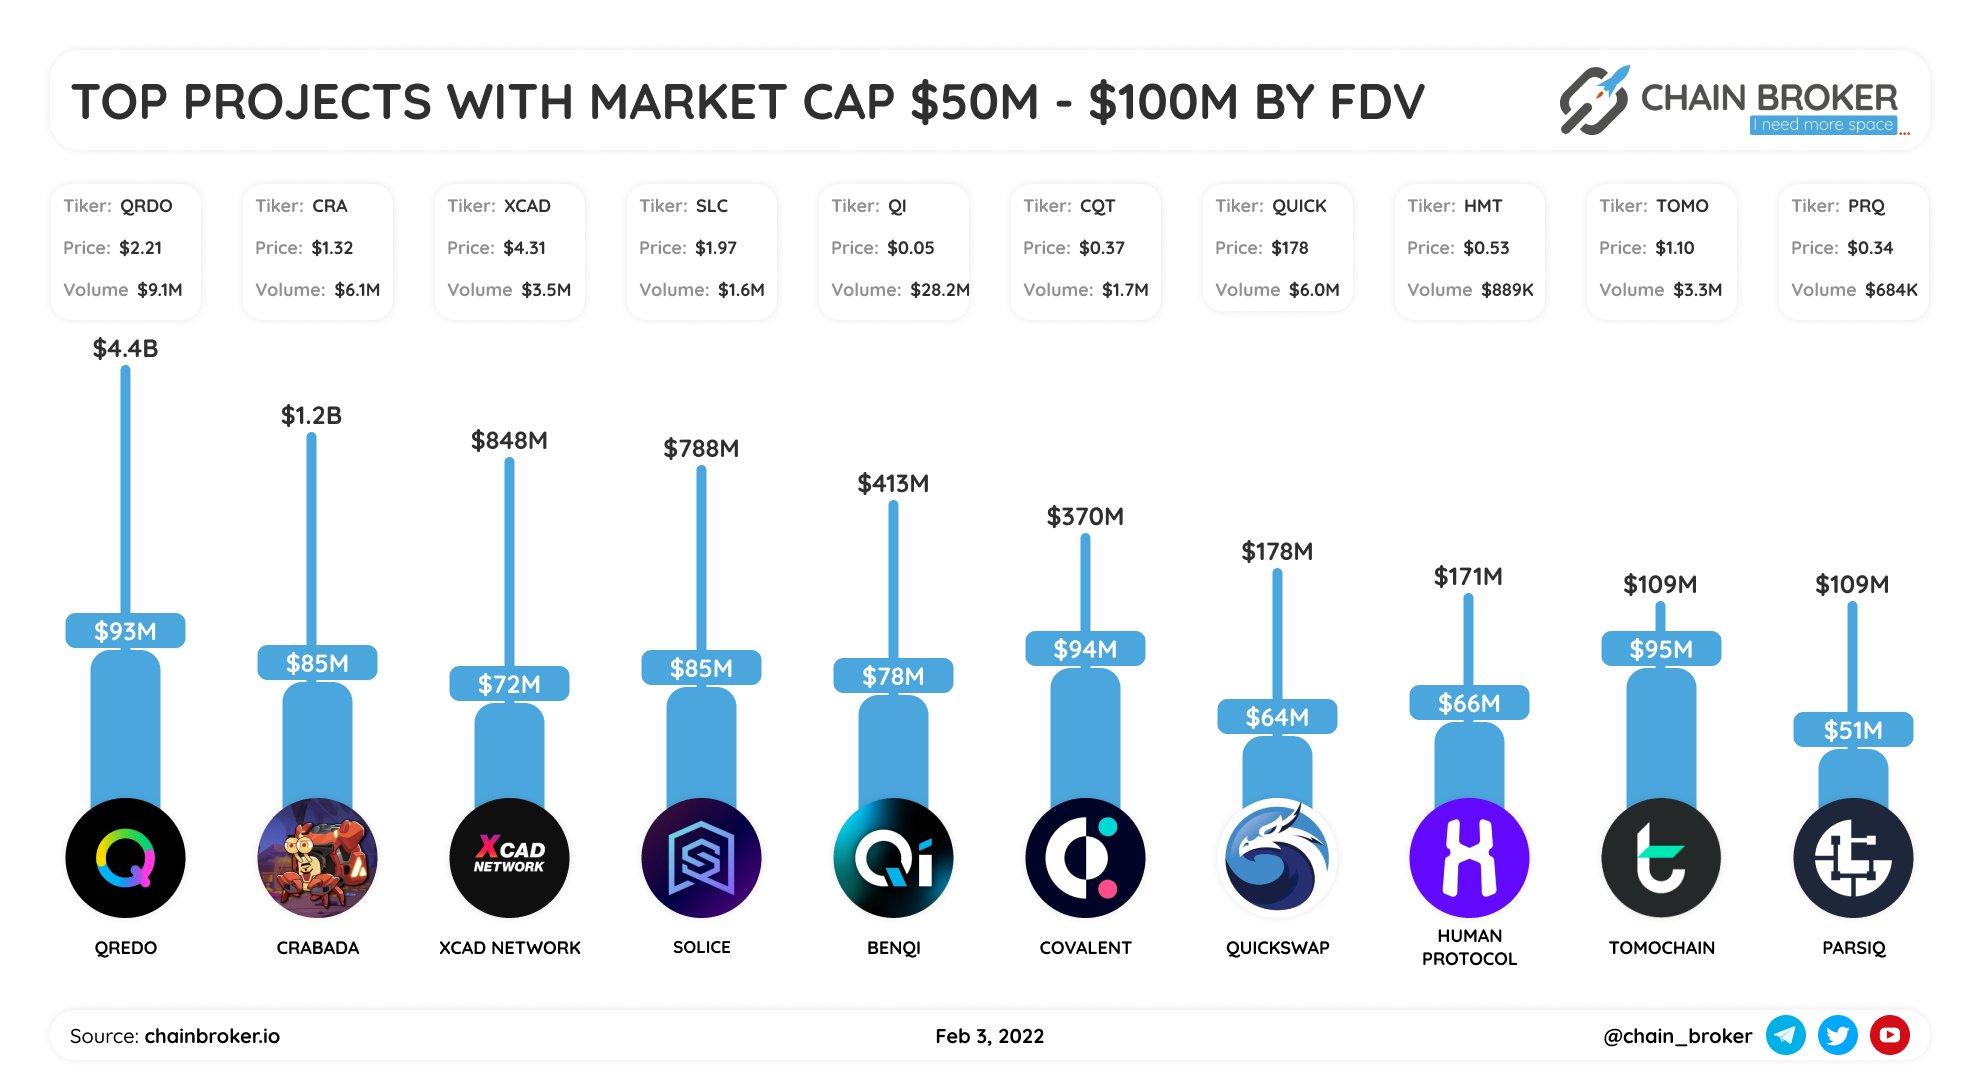 Top projects with market cap $50M-$100M ranged by FDV